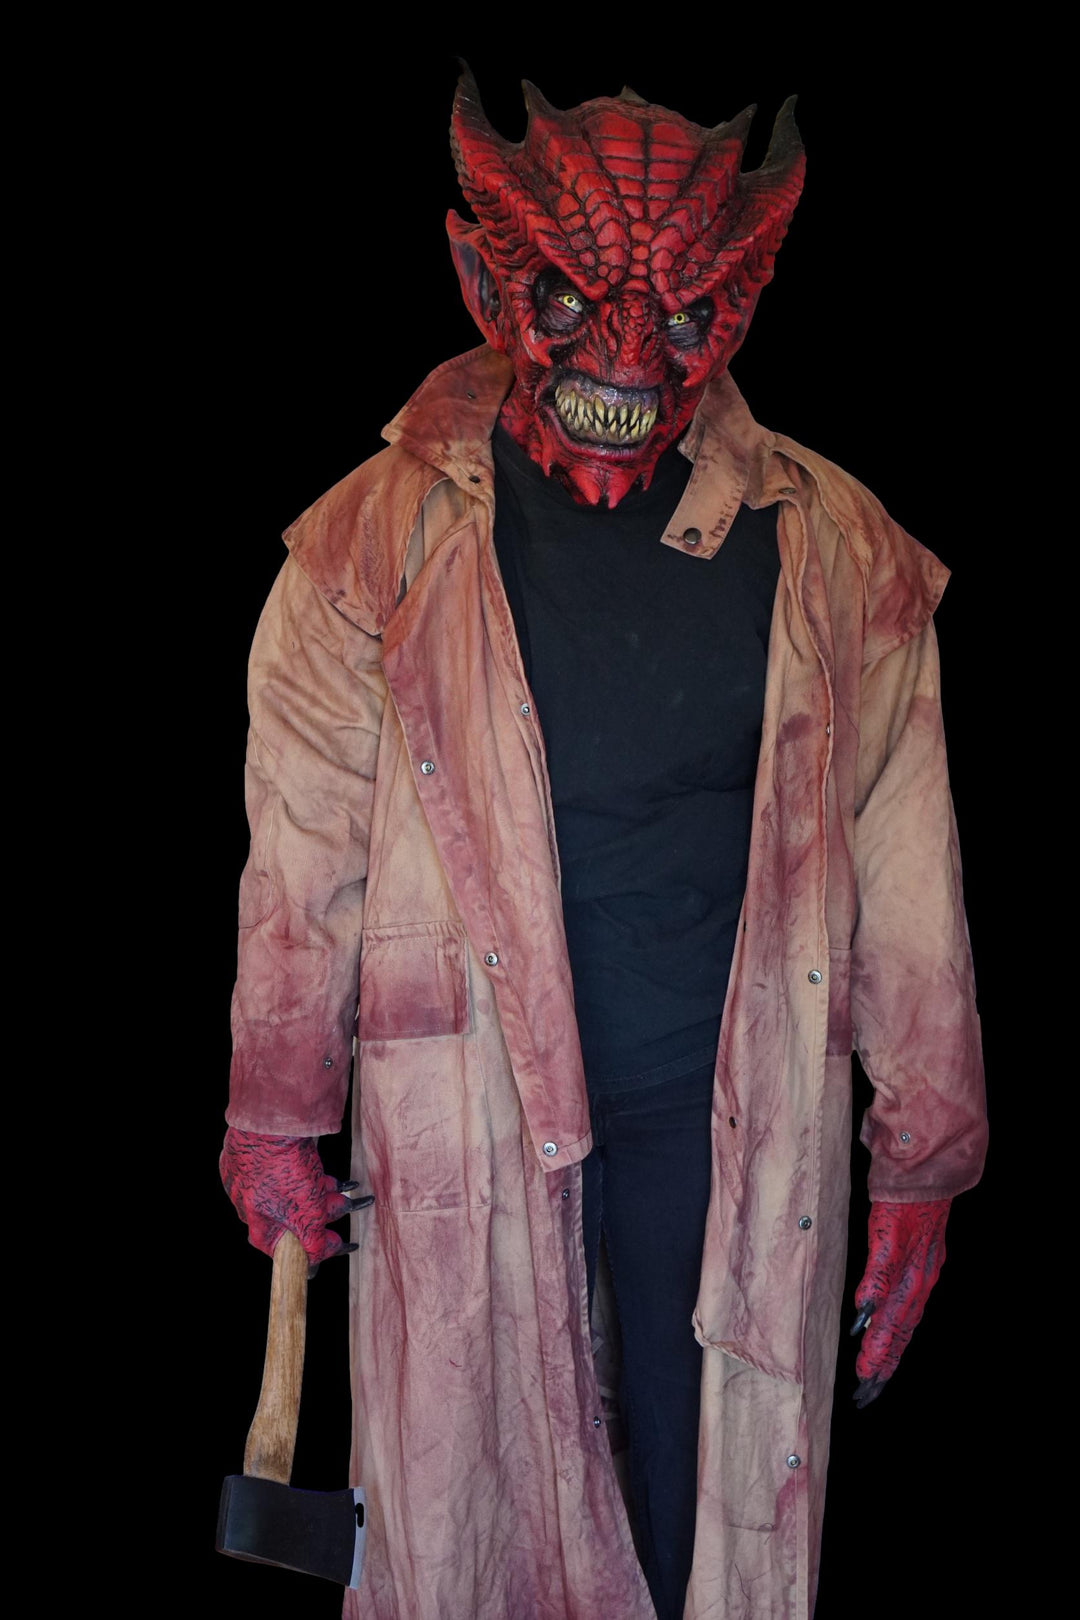 Michael Myers Halloween Costume Out Fit Ideas Horror Boogey Man